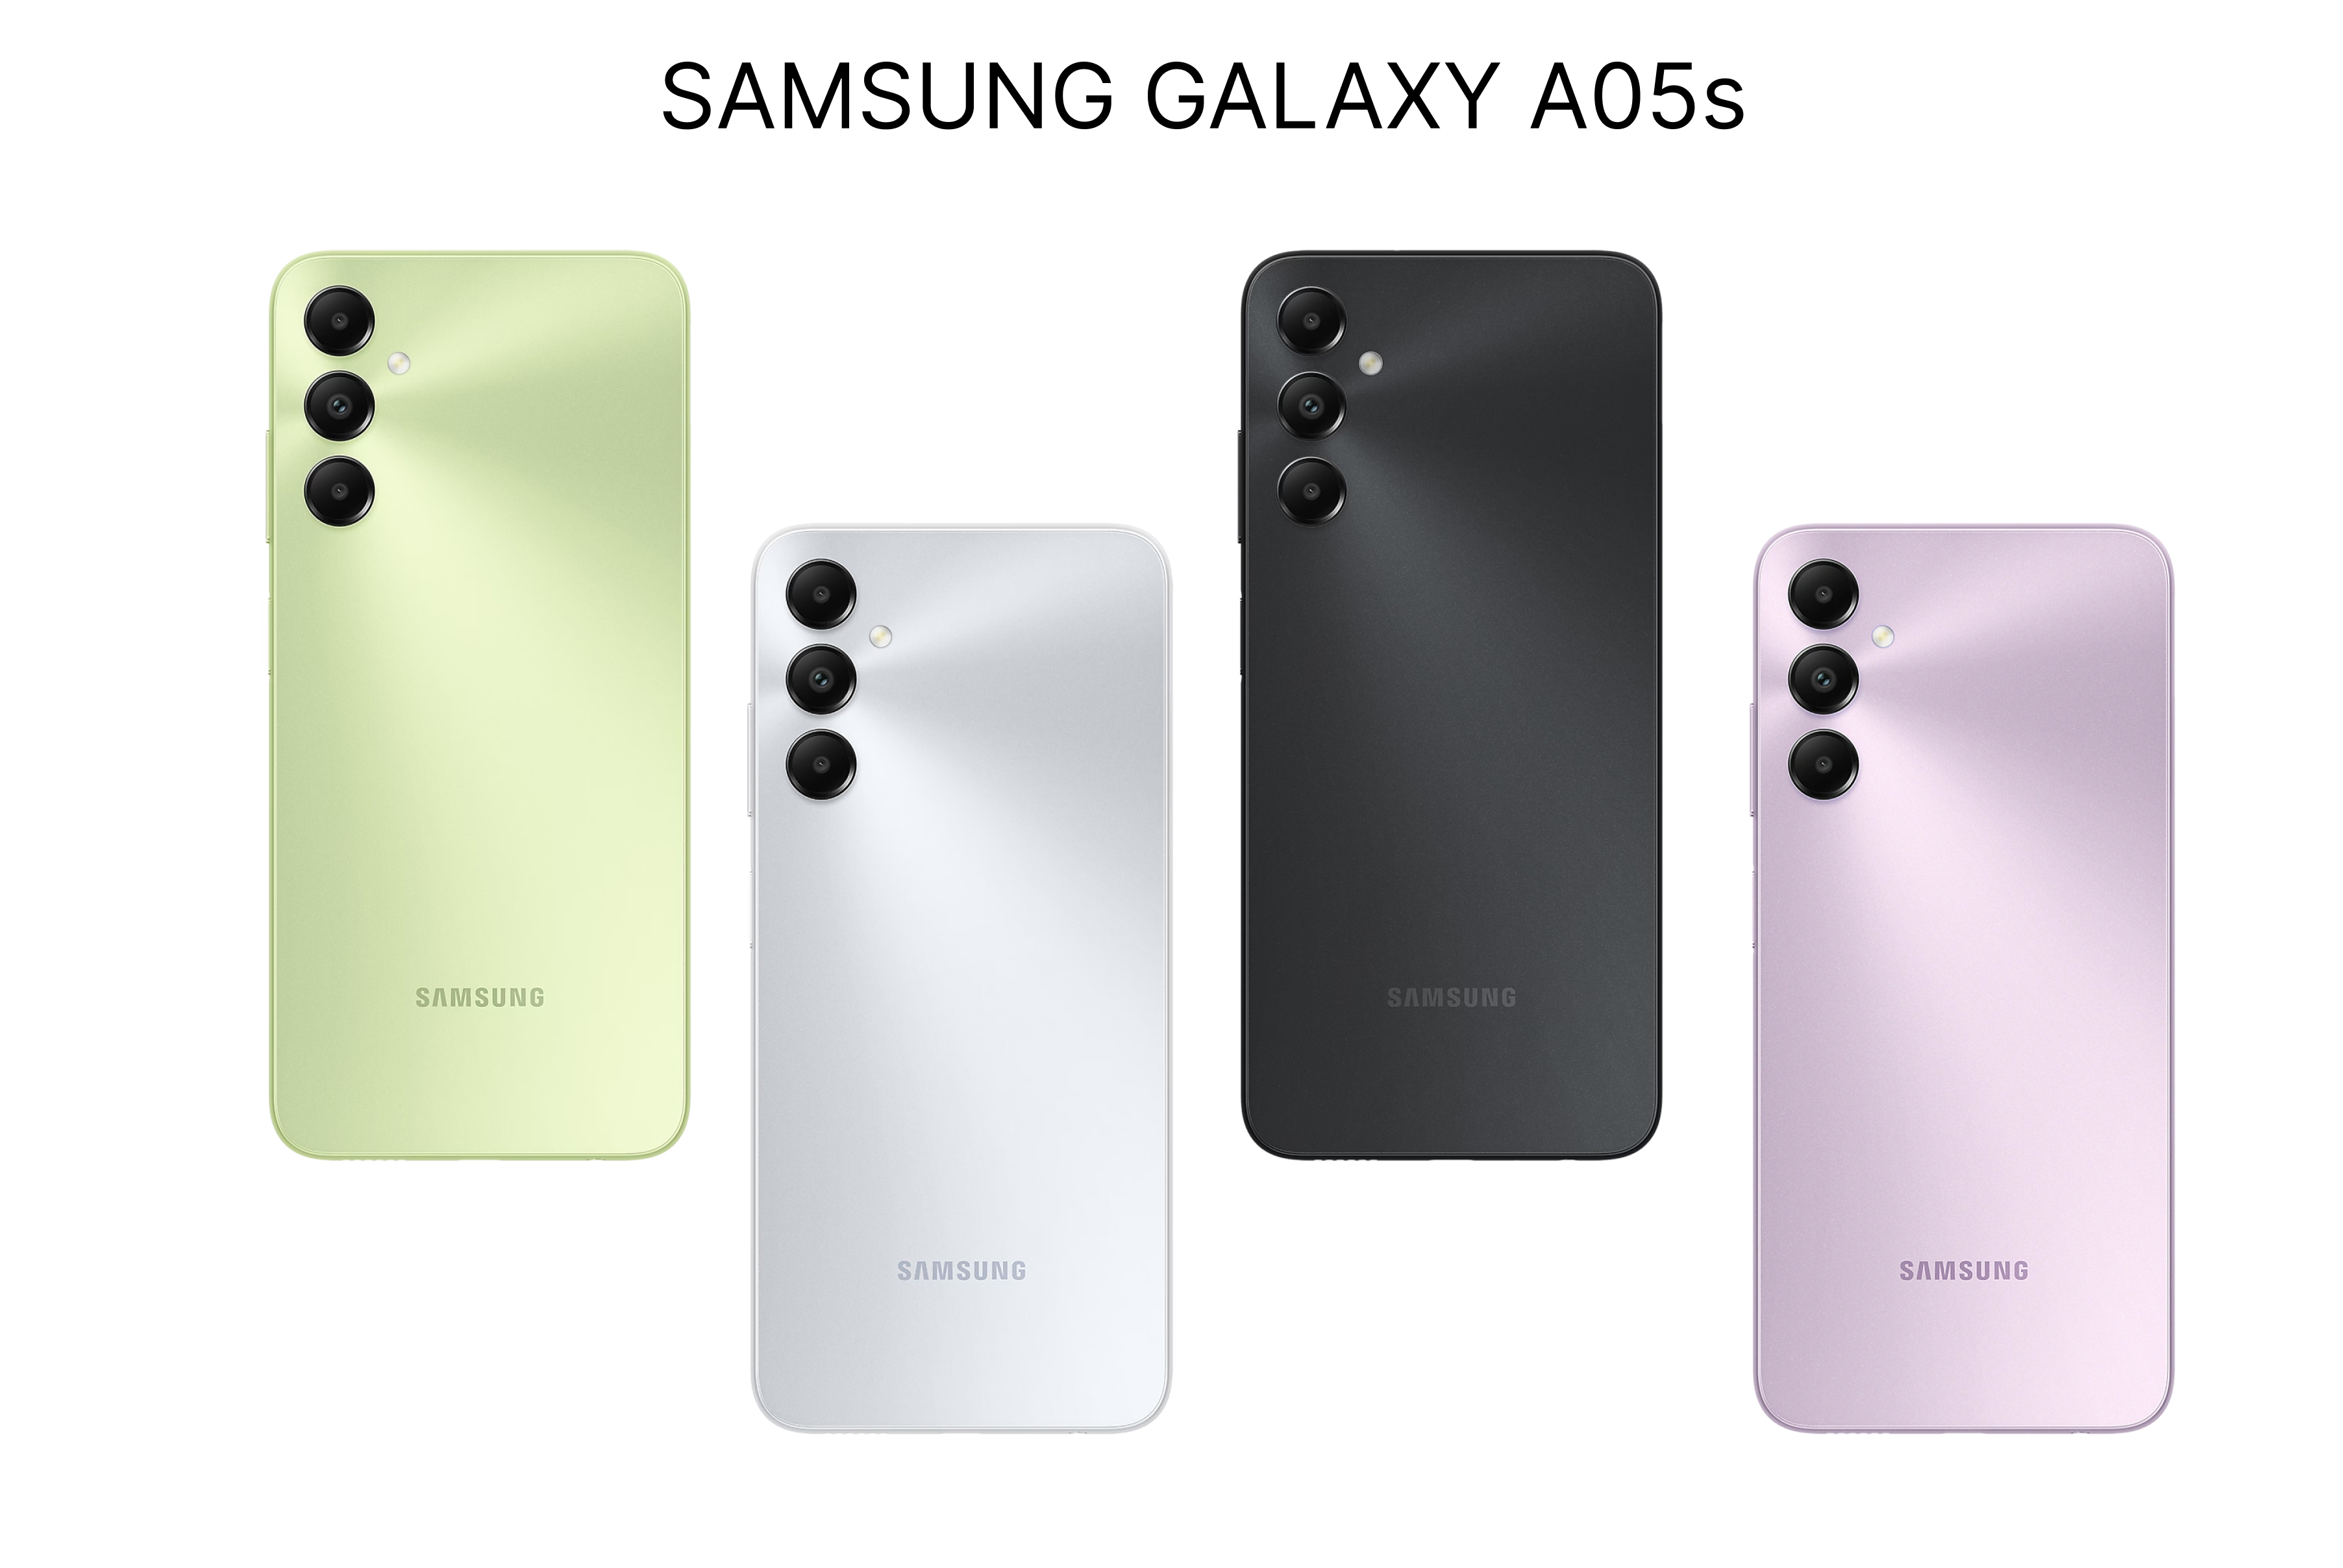 Samsung Galaxy A05s: The budget smartphone gets some nice upgrades